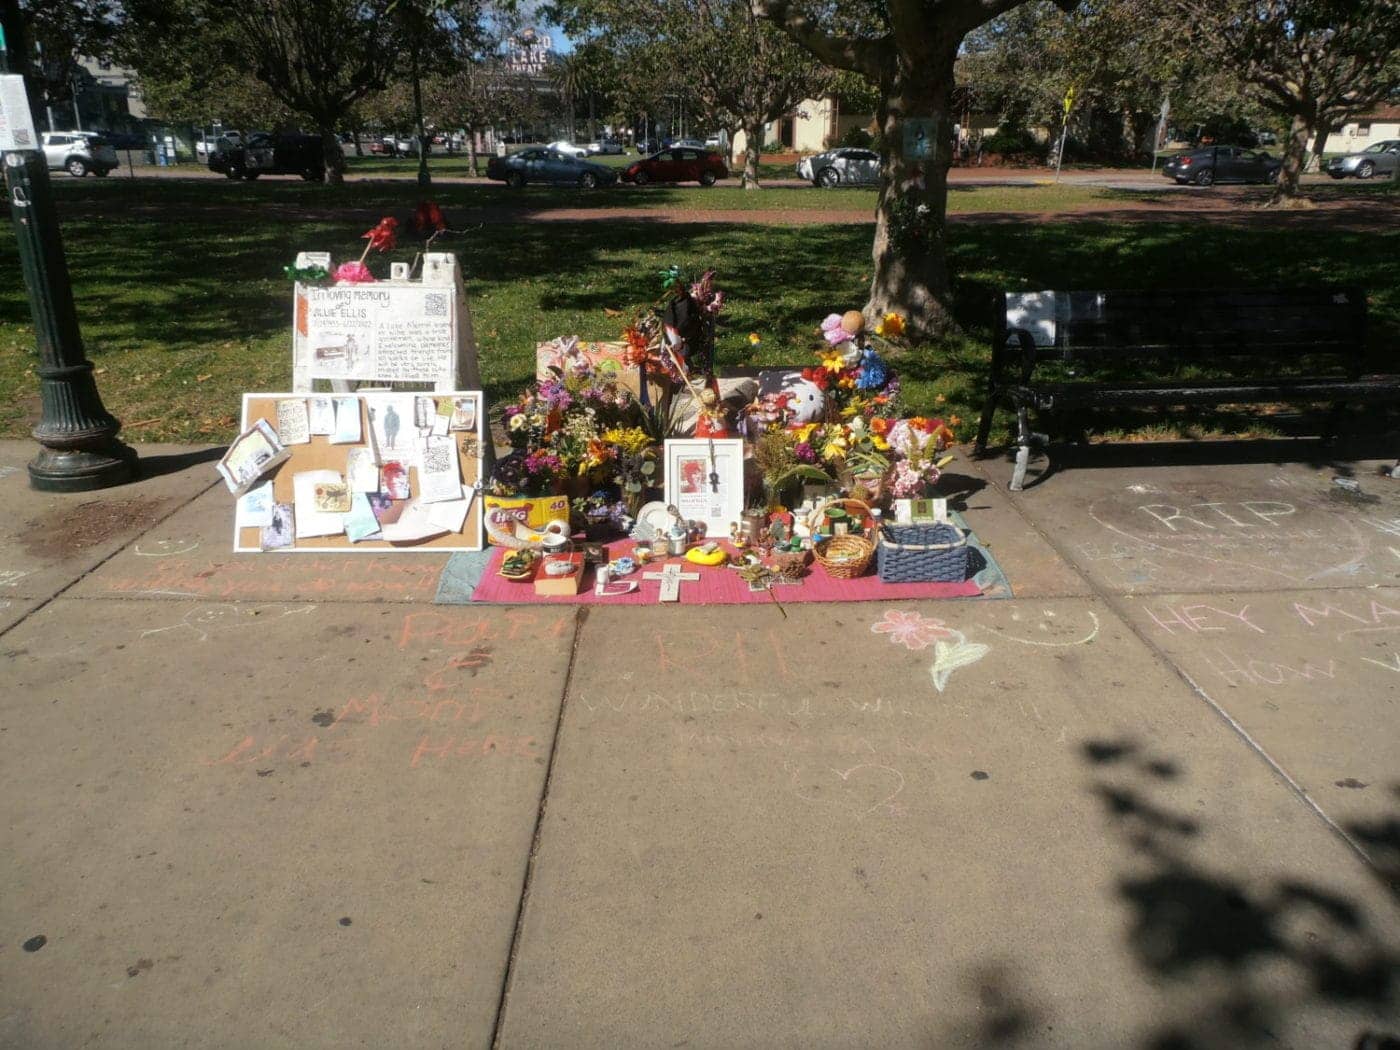 Altar-for-Willie-Ellis-in-Oakland-by-Jahahara-1400x1050, Forward forever!, Culture Currents Local News & Views News & Views 